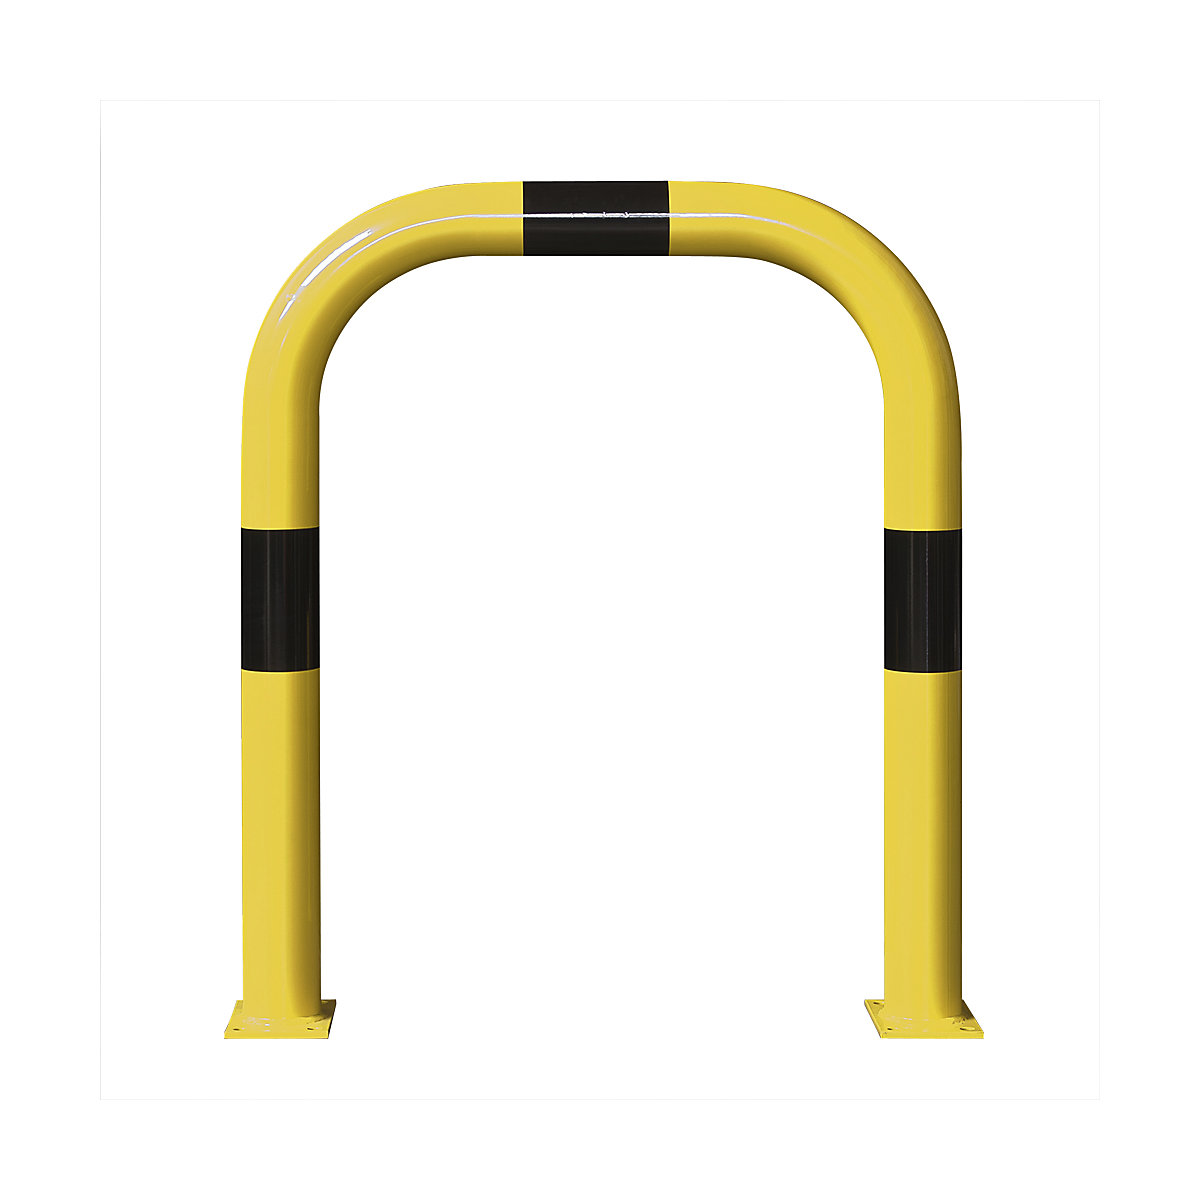 XXL crash protection bar Ø 108 mm, for outdoor use, H x W 1200 x 1000 mm